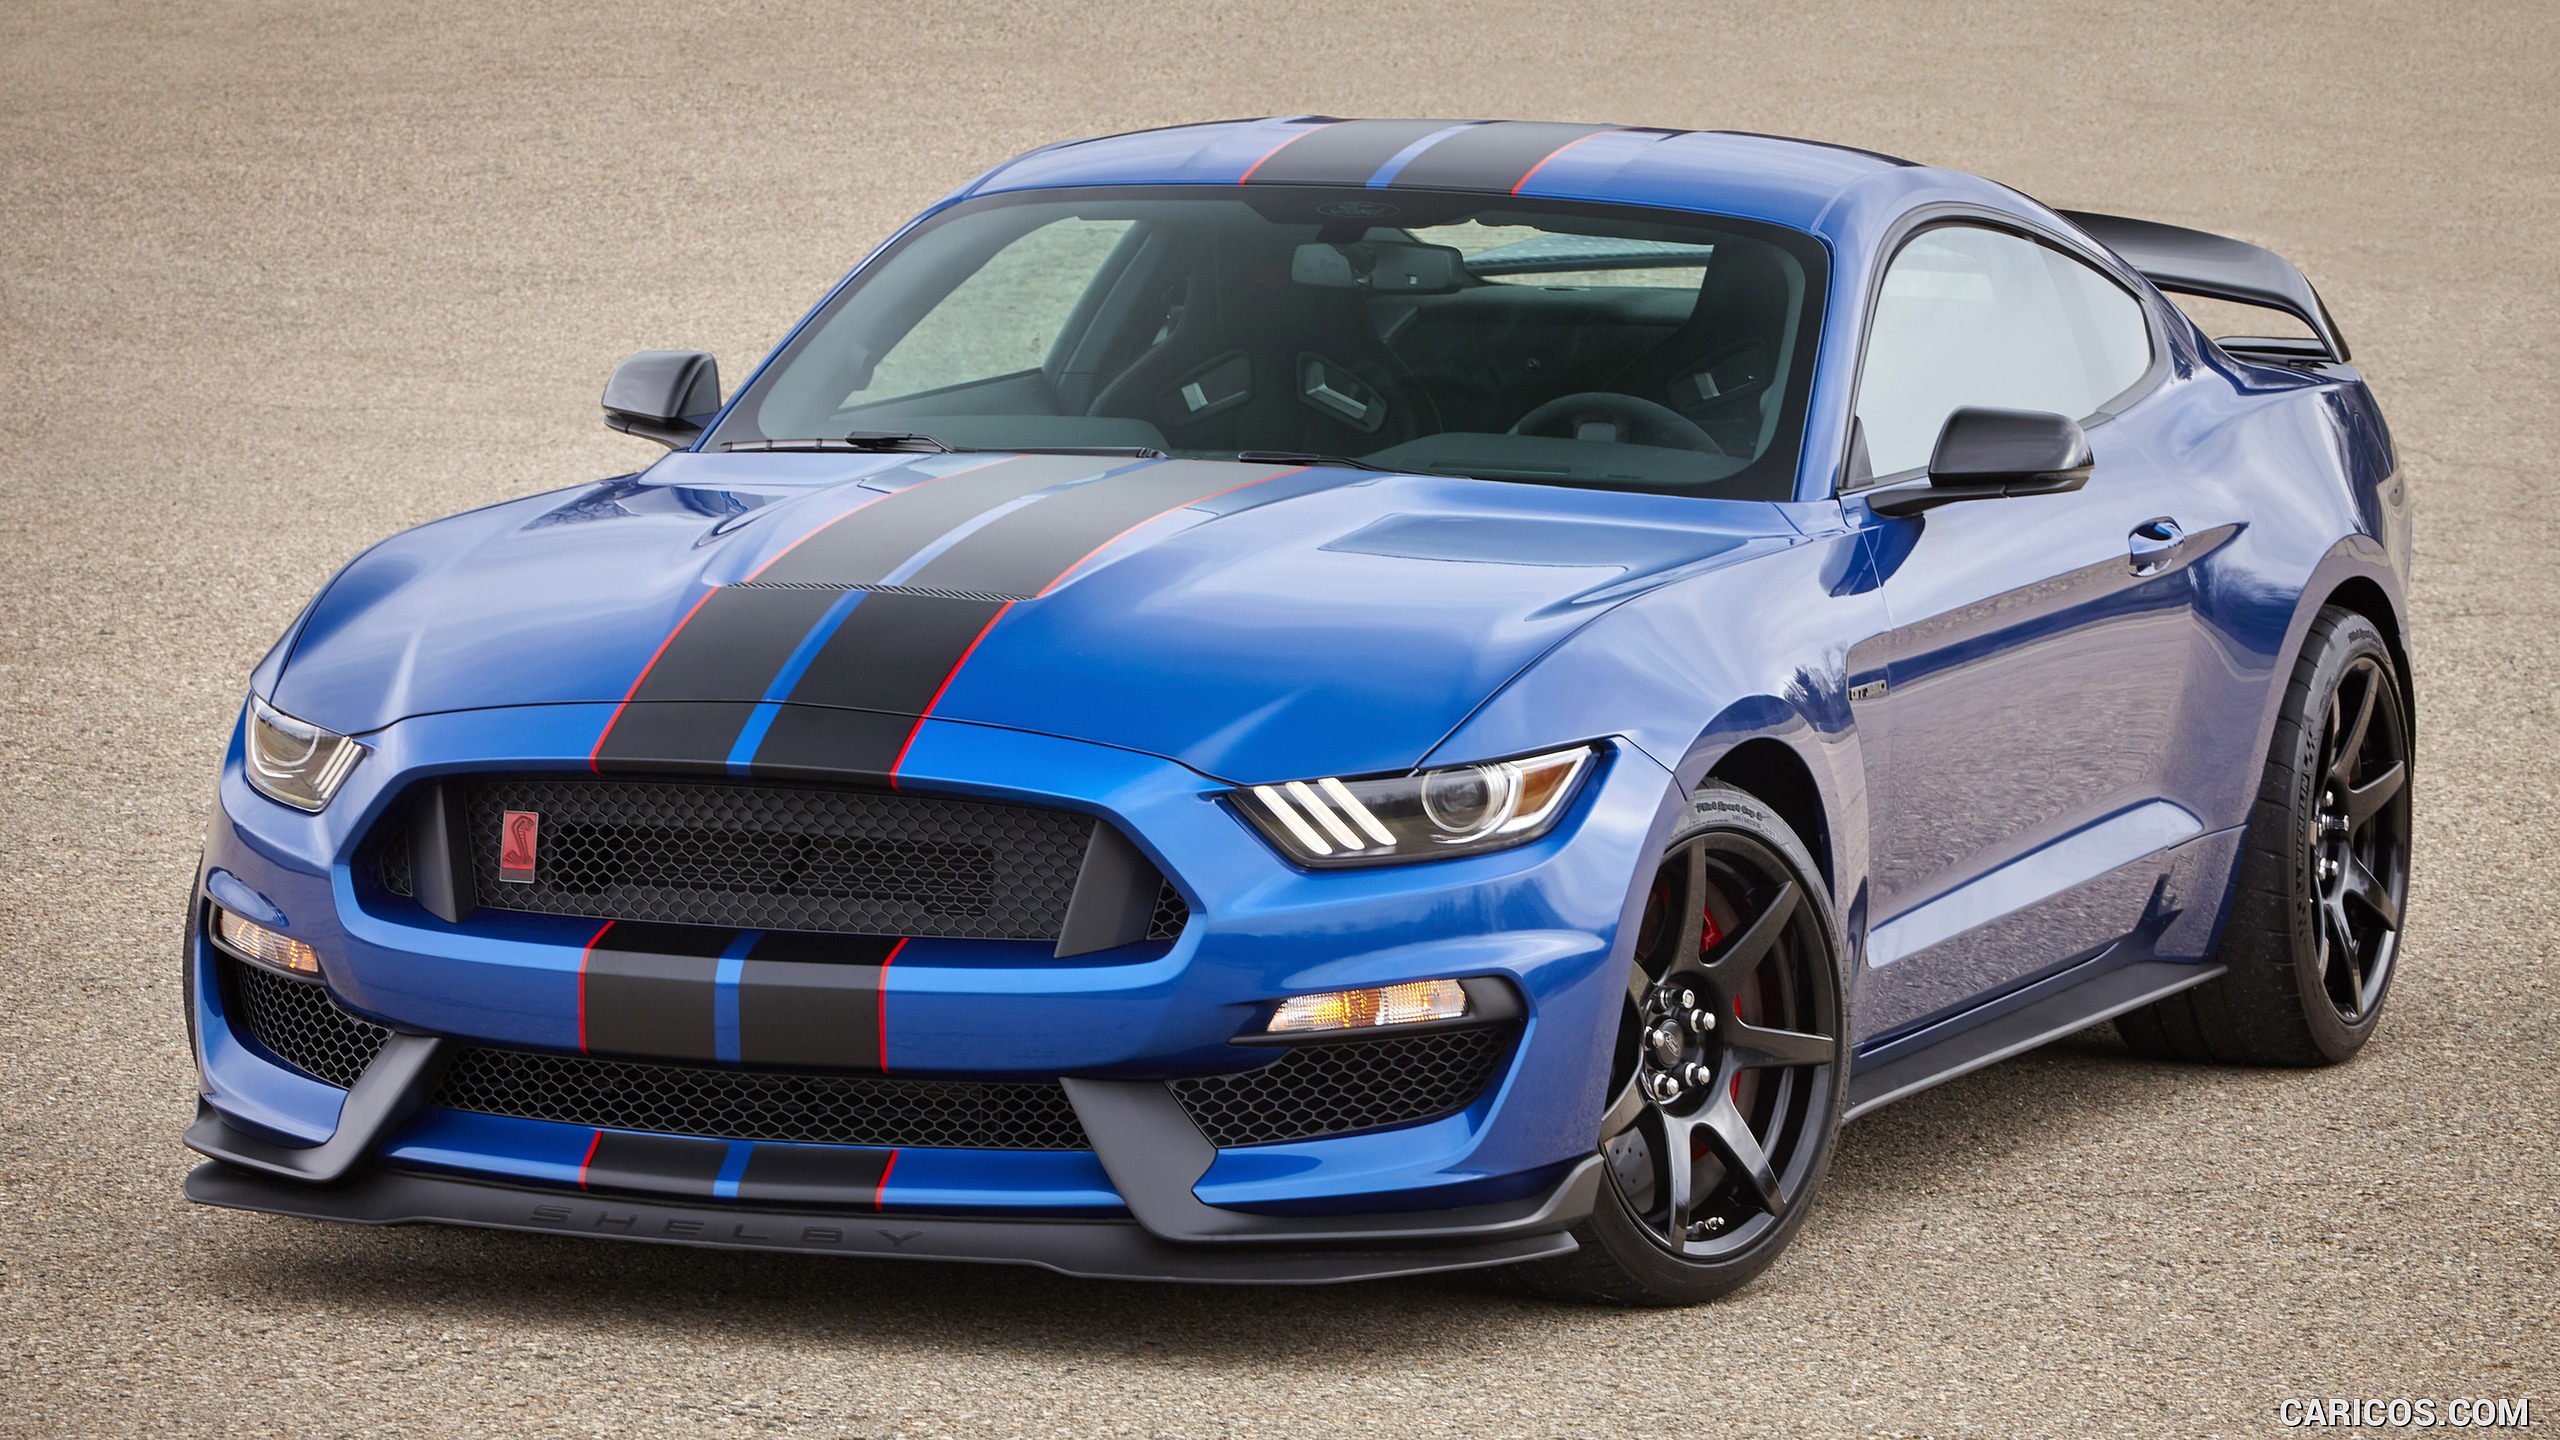 2017 Ford Mustang Shelby GT350 and GT350R | Caricos.com